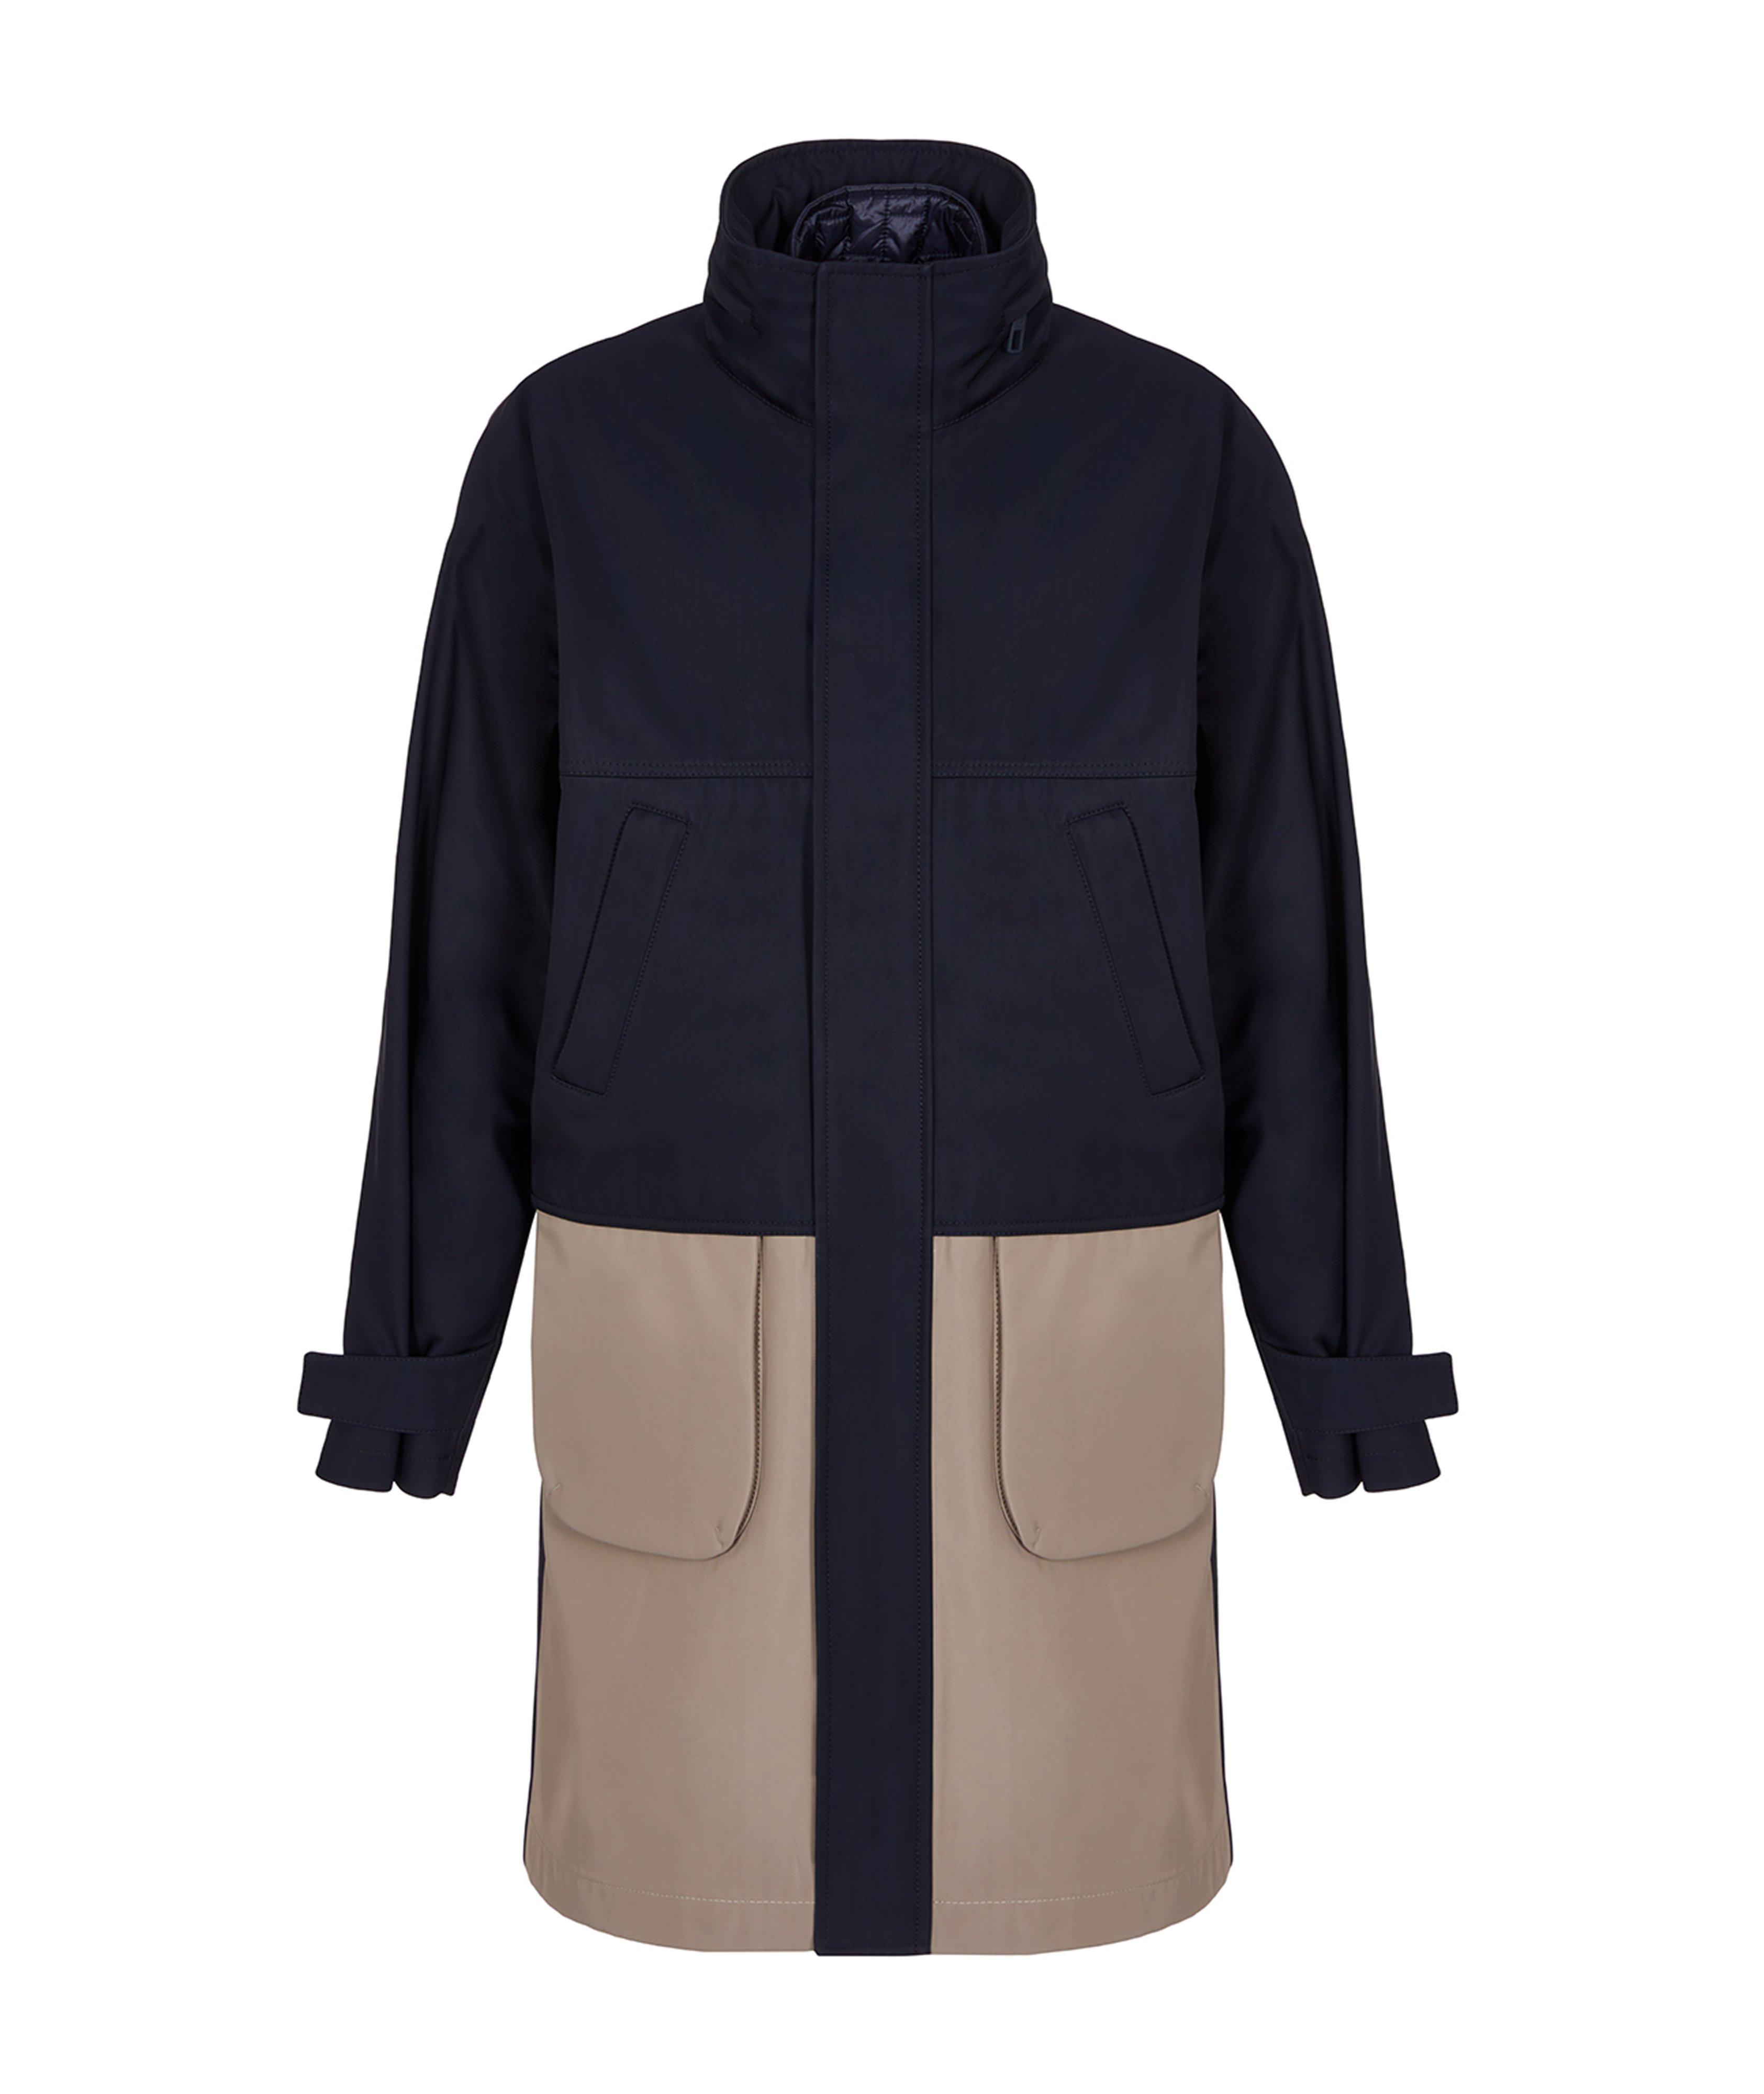 Twill Peacoat With Removable Bomber Jacket image 0